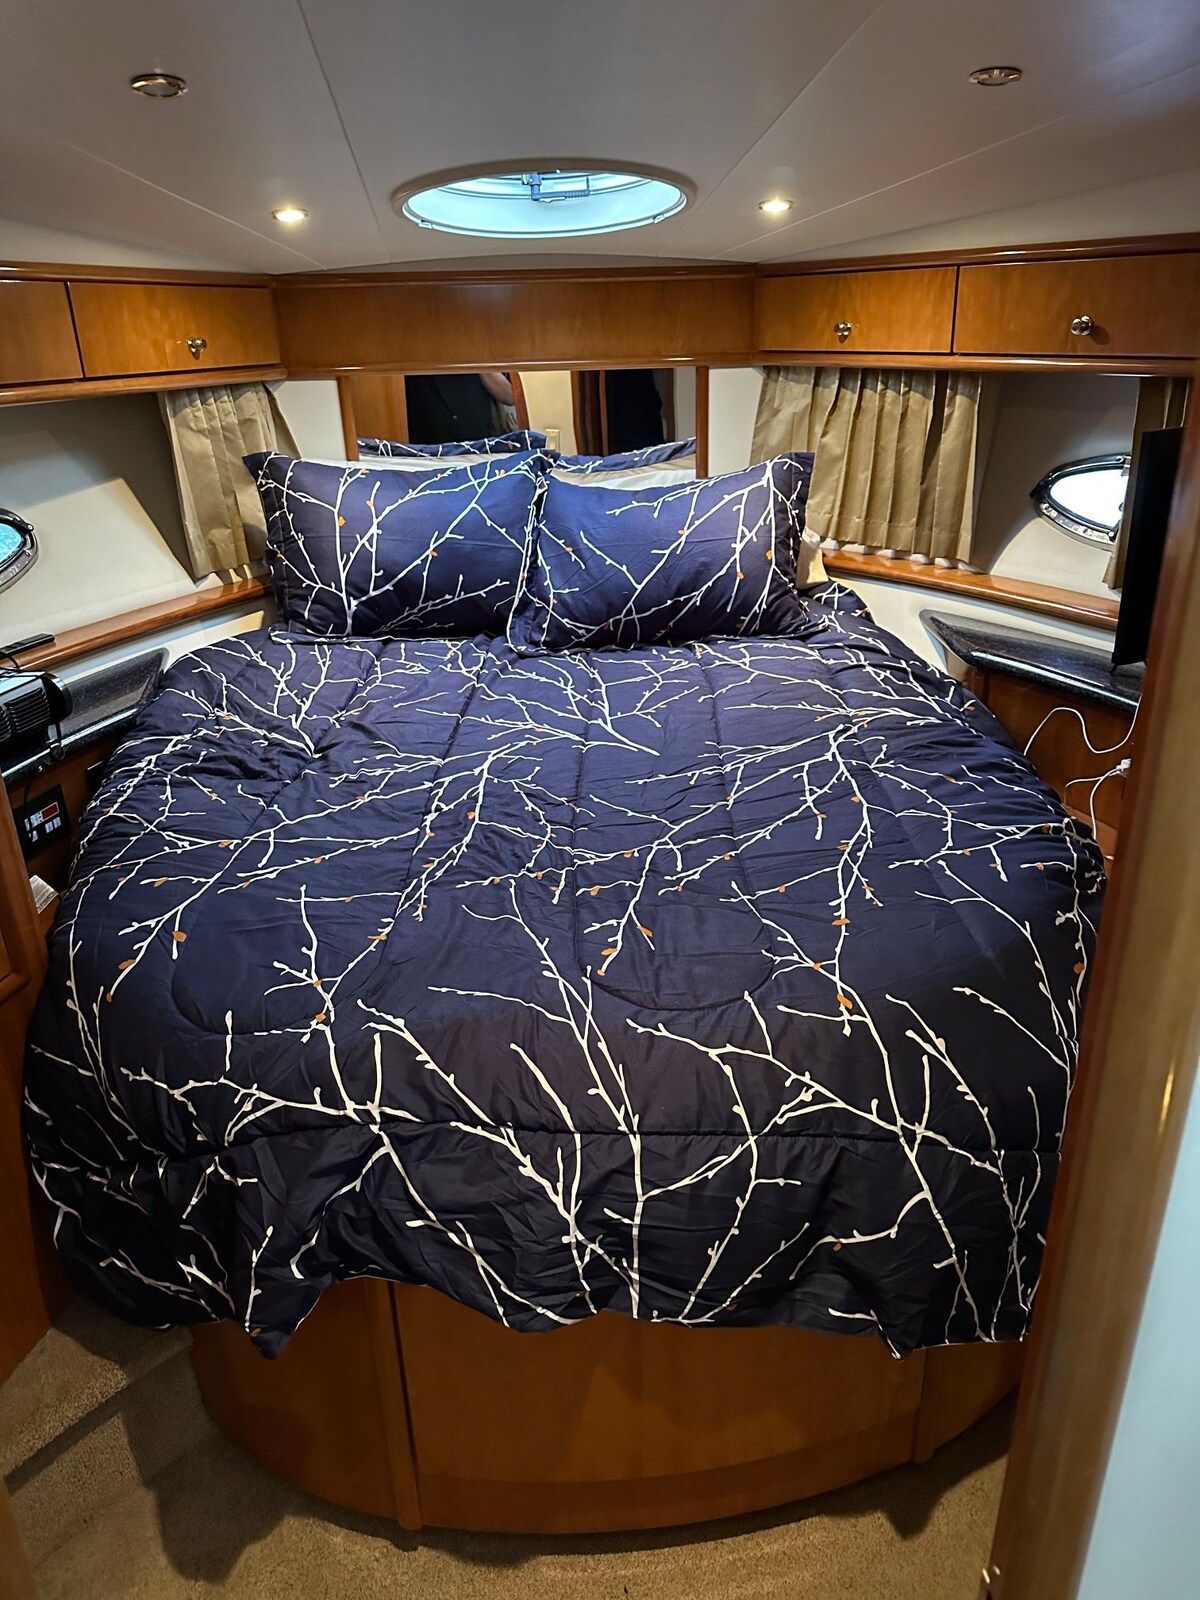 Spend some time on the 41' yacht